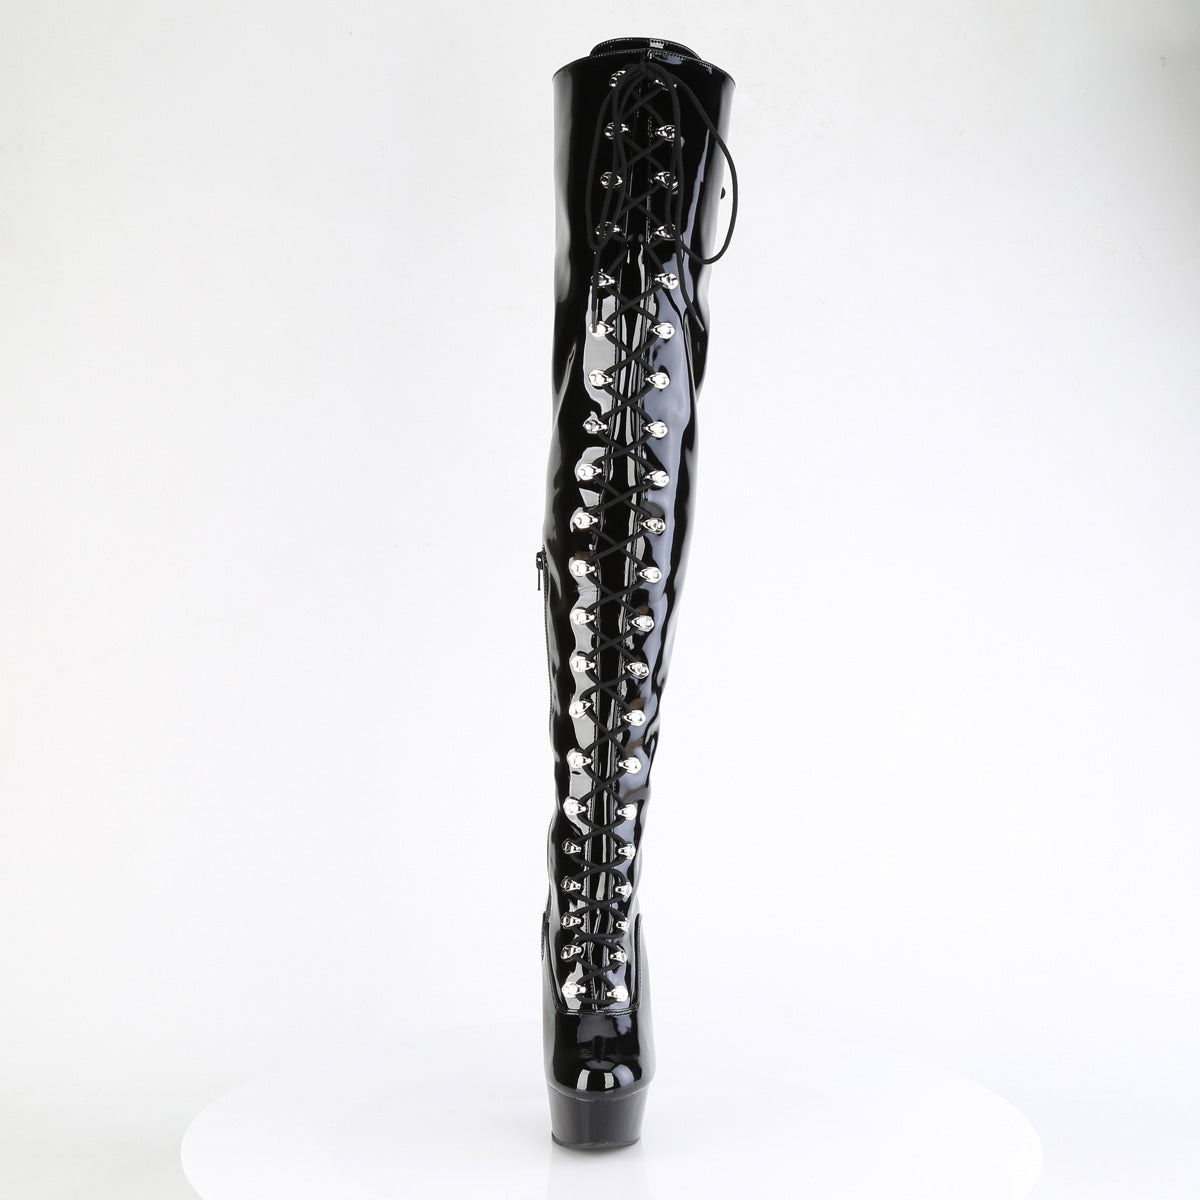 DELIGHT-3022 Lace-Up Thigh Boot Black Multi view 5